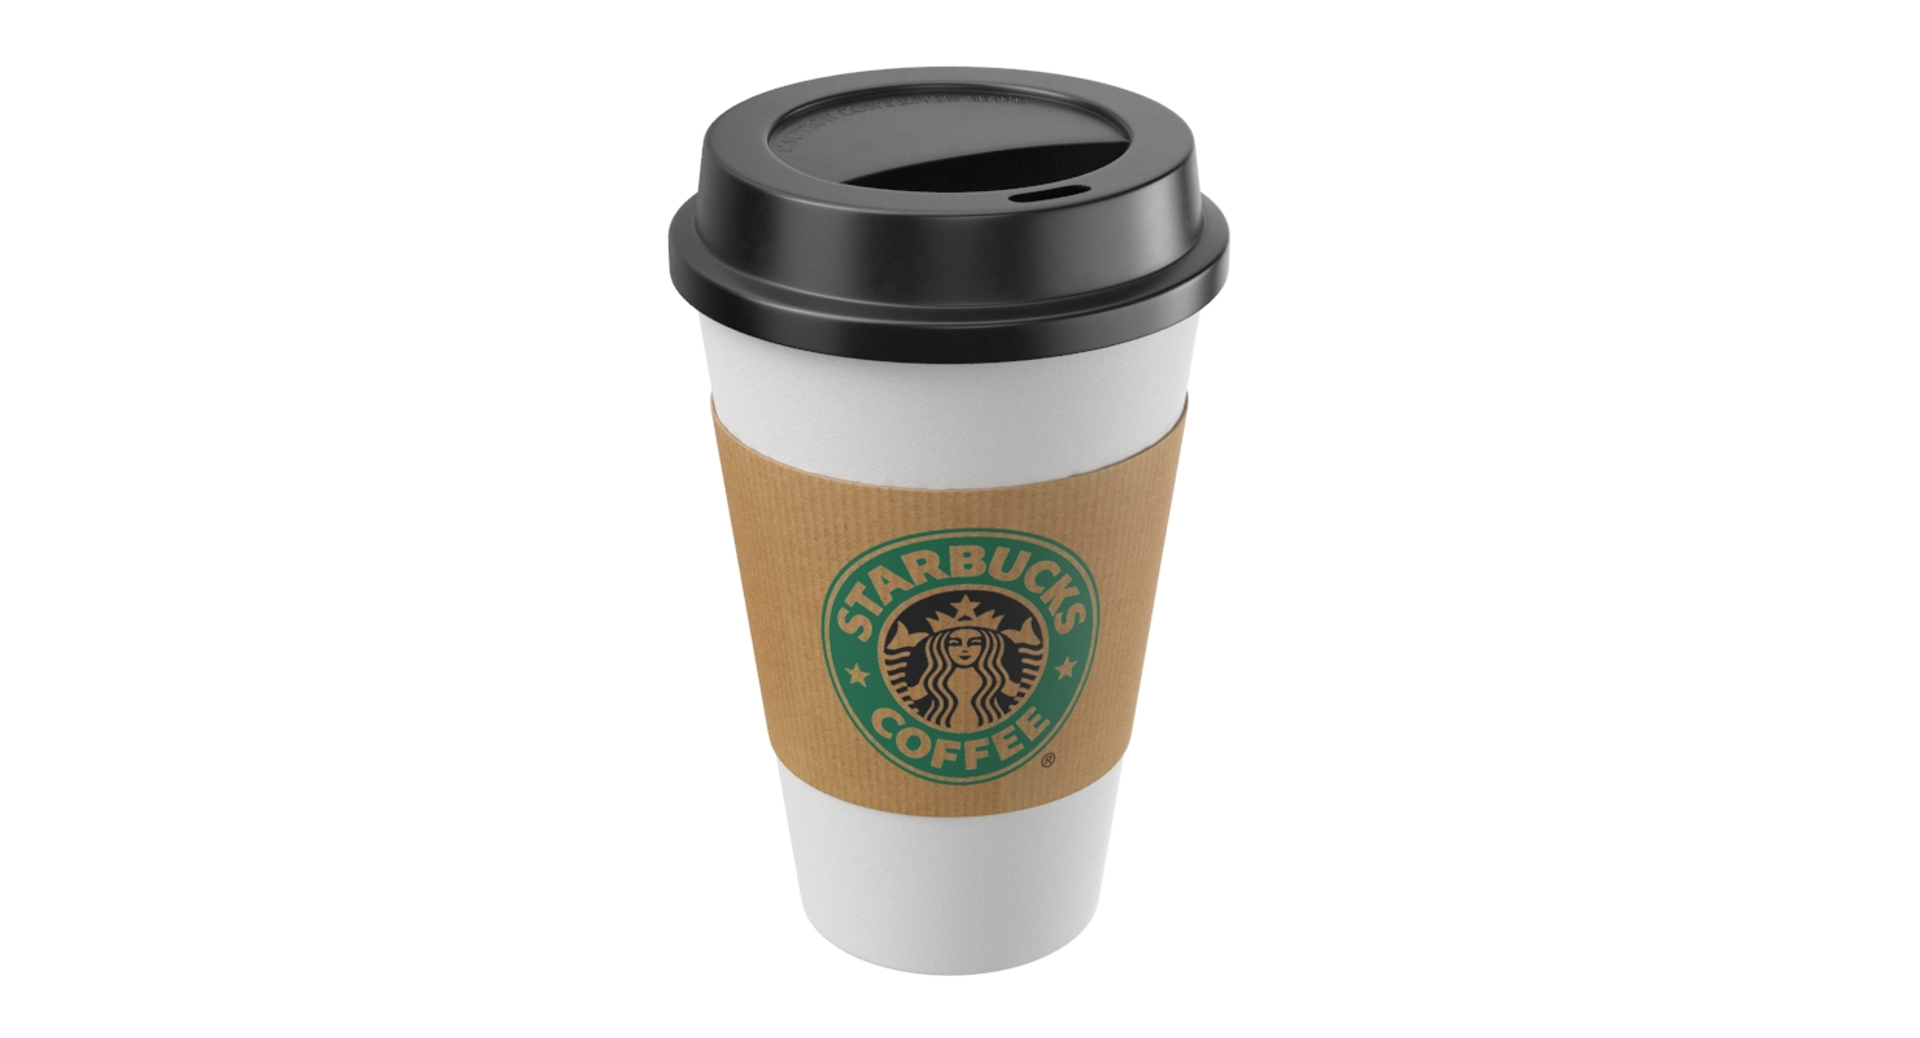 Starbucks coffee cup with flat lid 3D model 3D printable